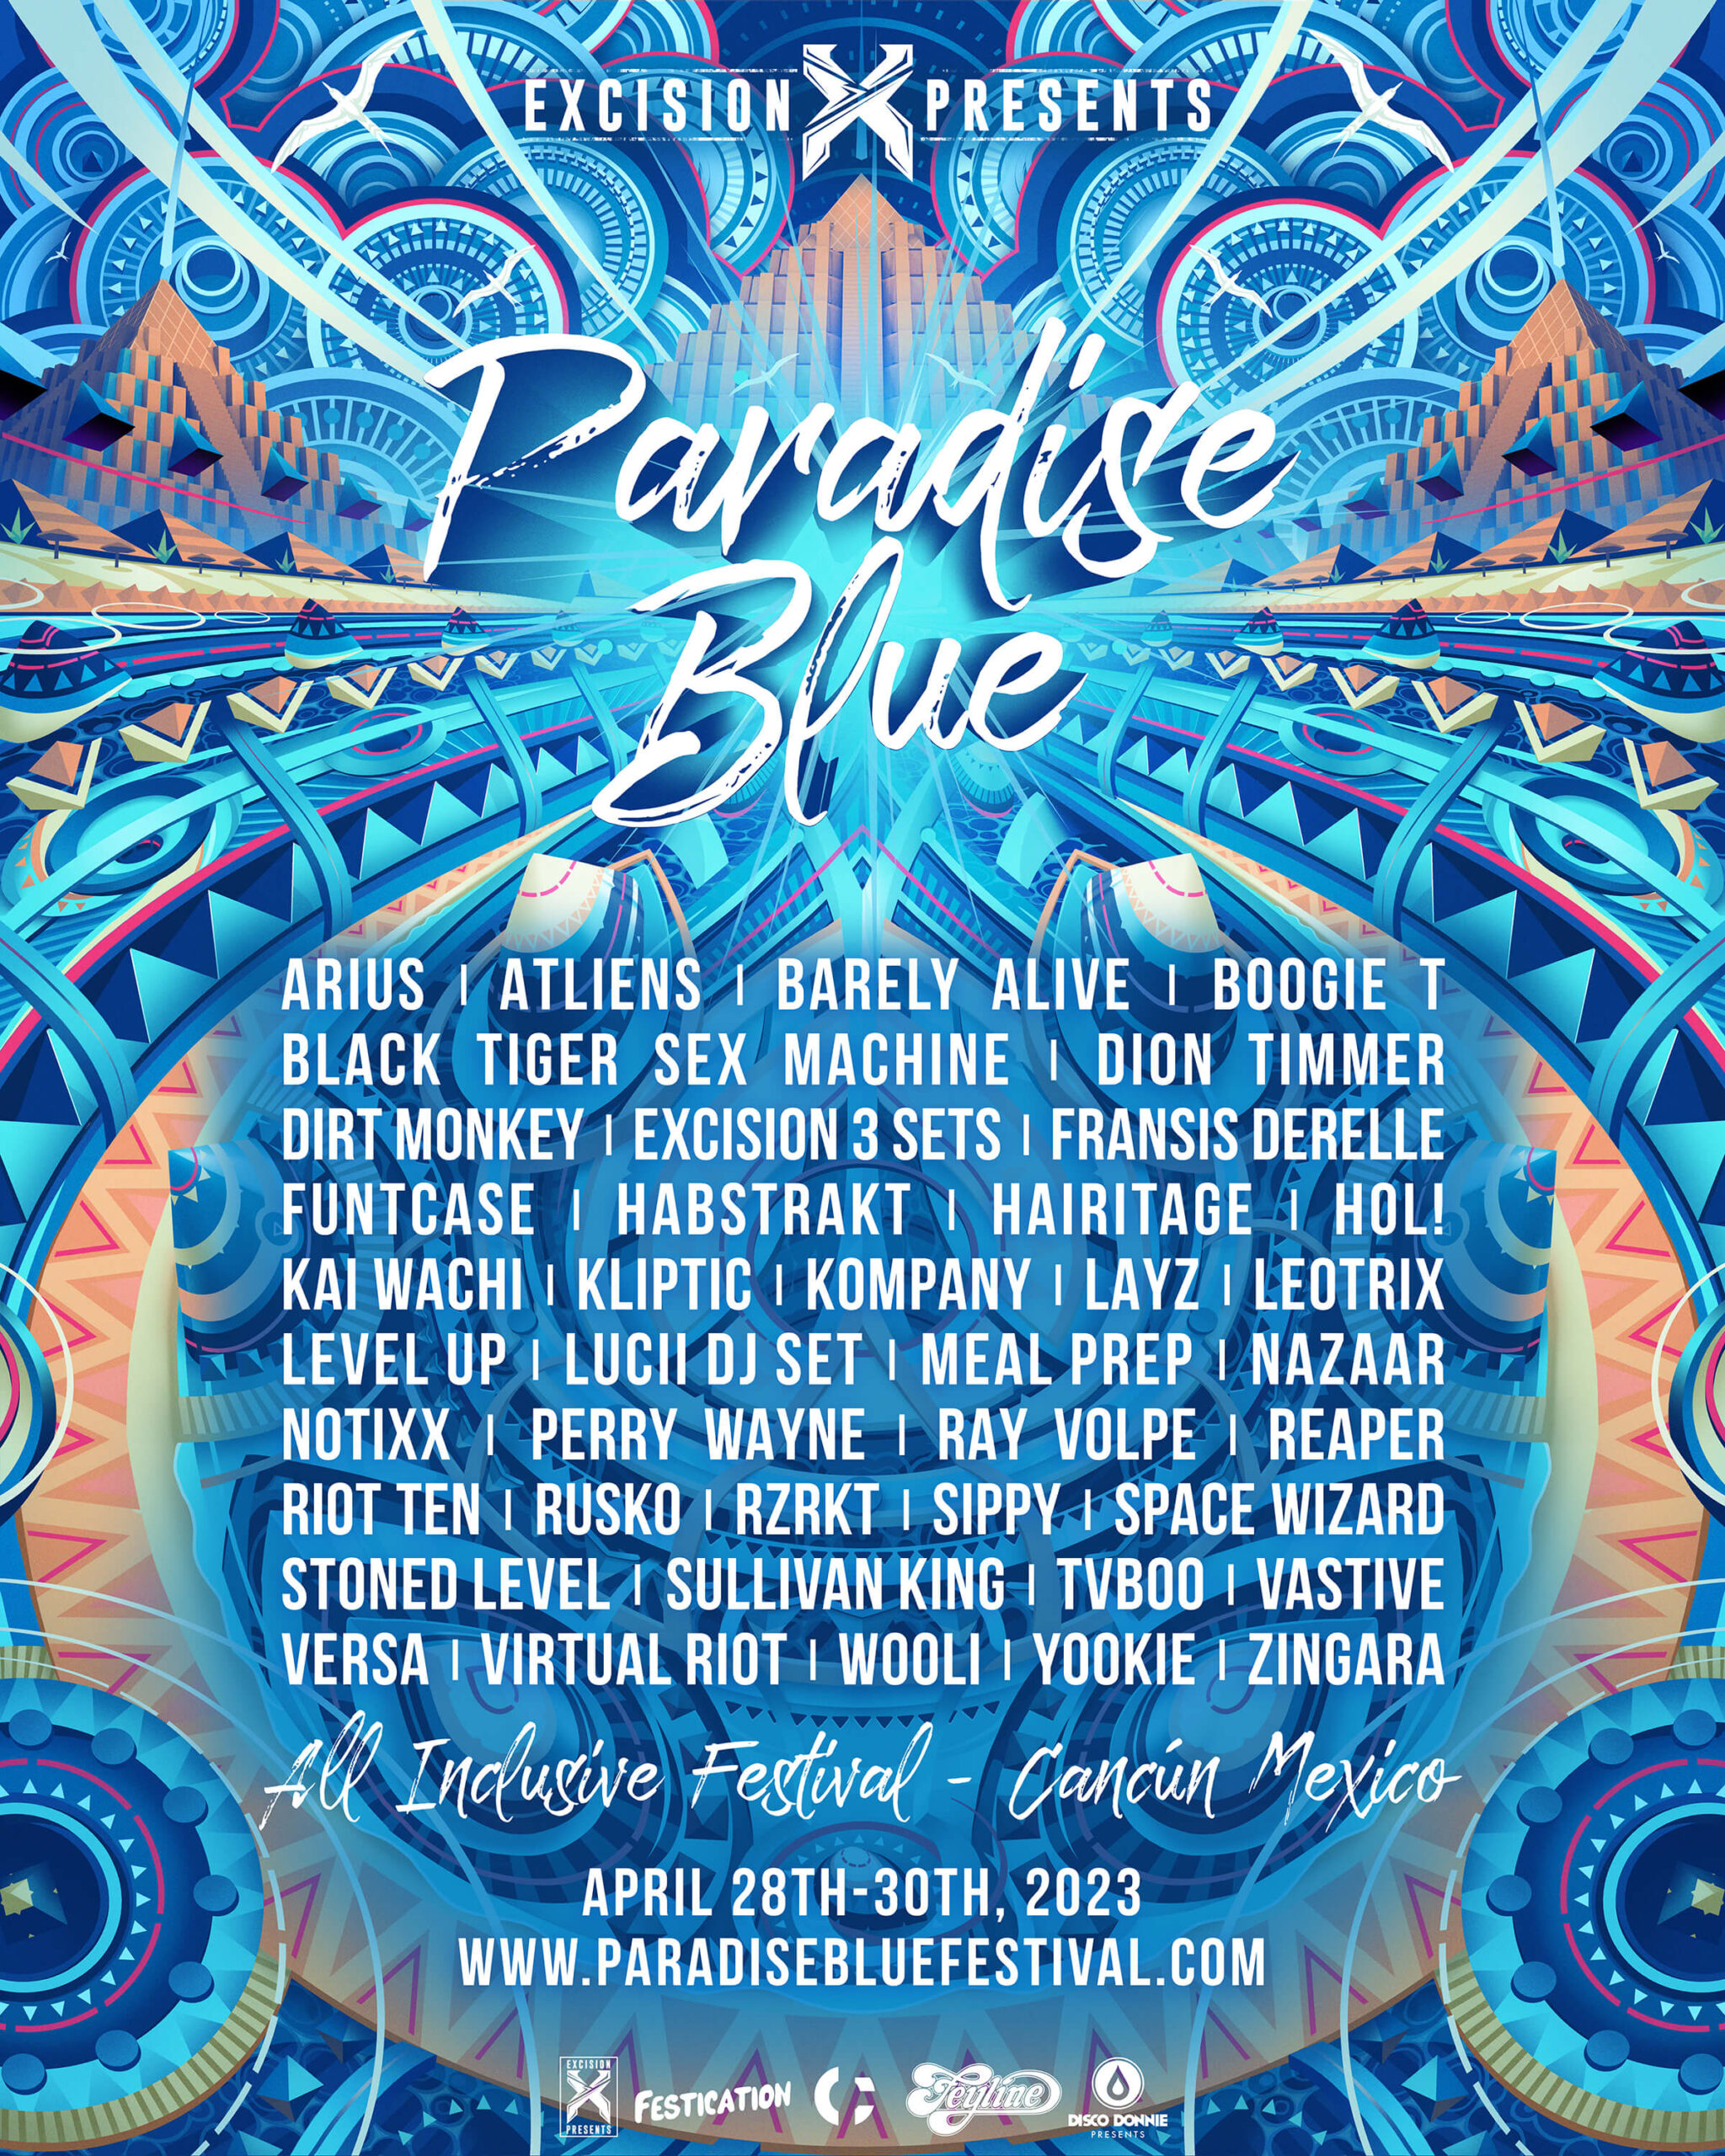 Paradise Blue Festival Promo Code, Discount Tickets, VIP Passes, Travel Packages, Cancun Mexico, Paradisus, Beach, Rave, Resort